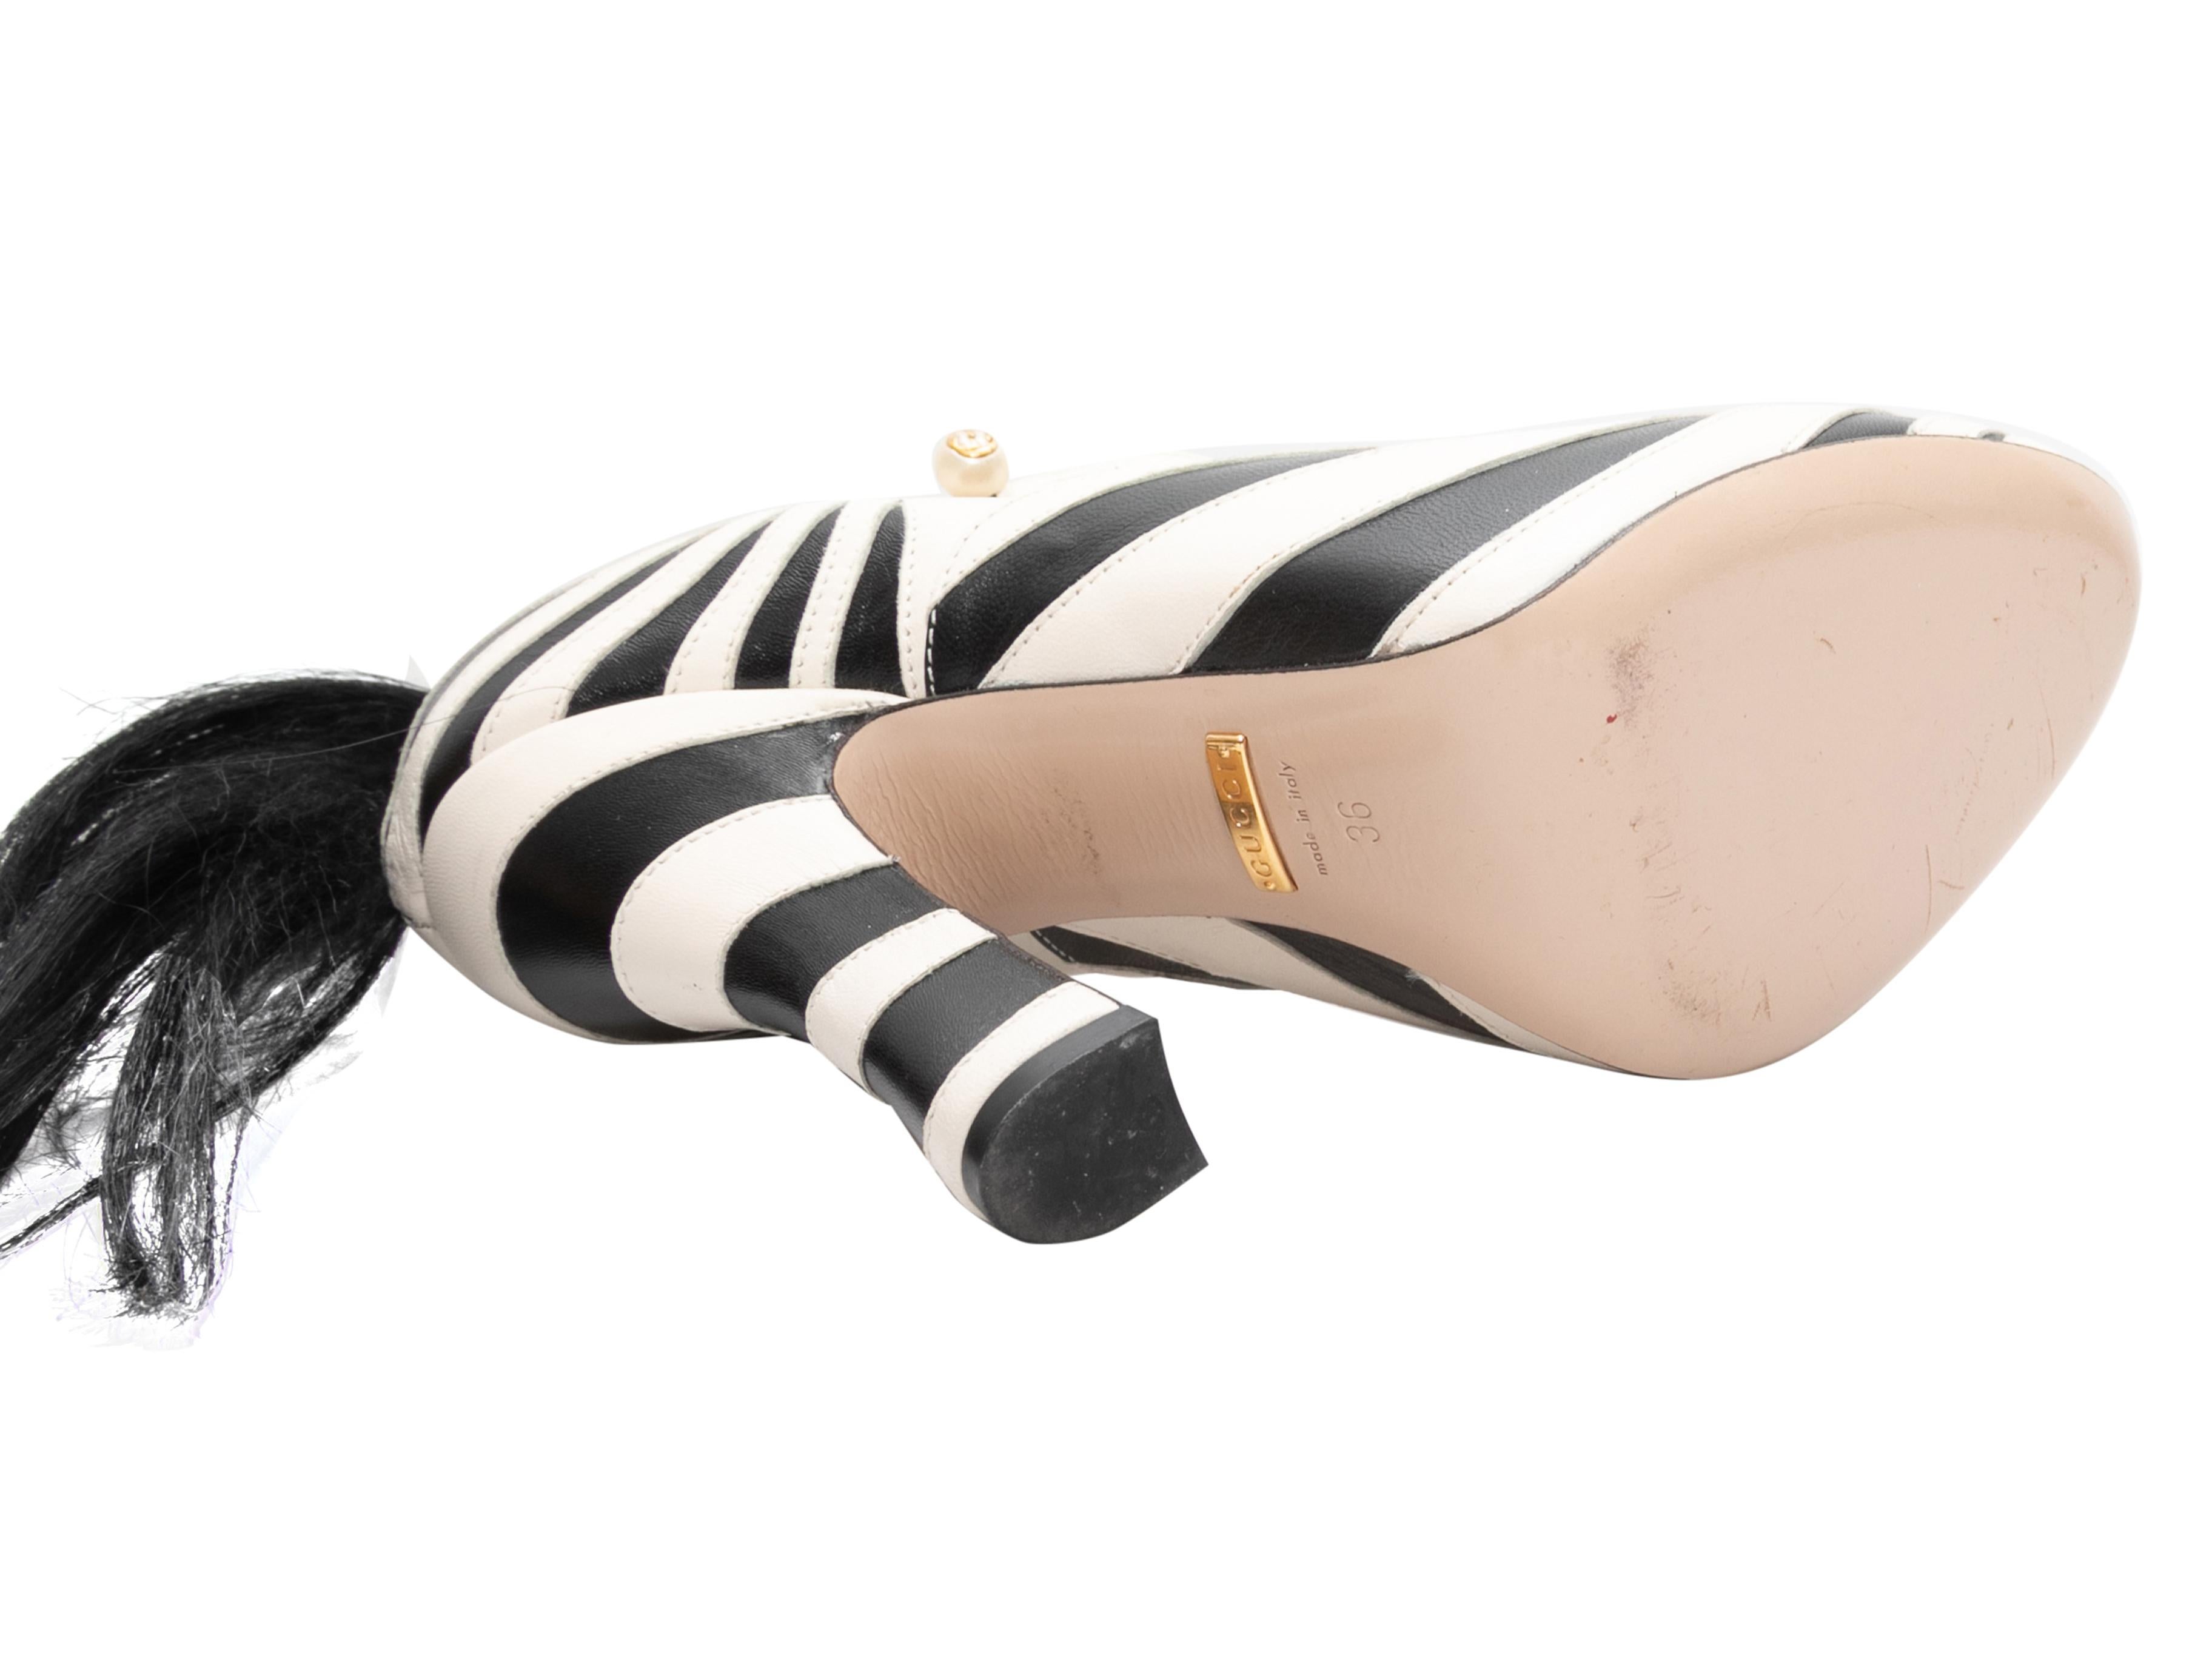 Black and white leather Mary Jane zebra pumps by Gucci. From the 2017 Alessandro Michele Era. Tail accents at counters. 4.75